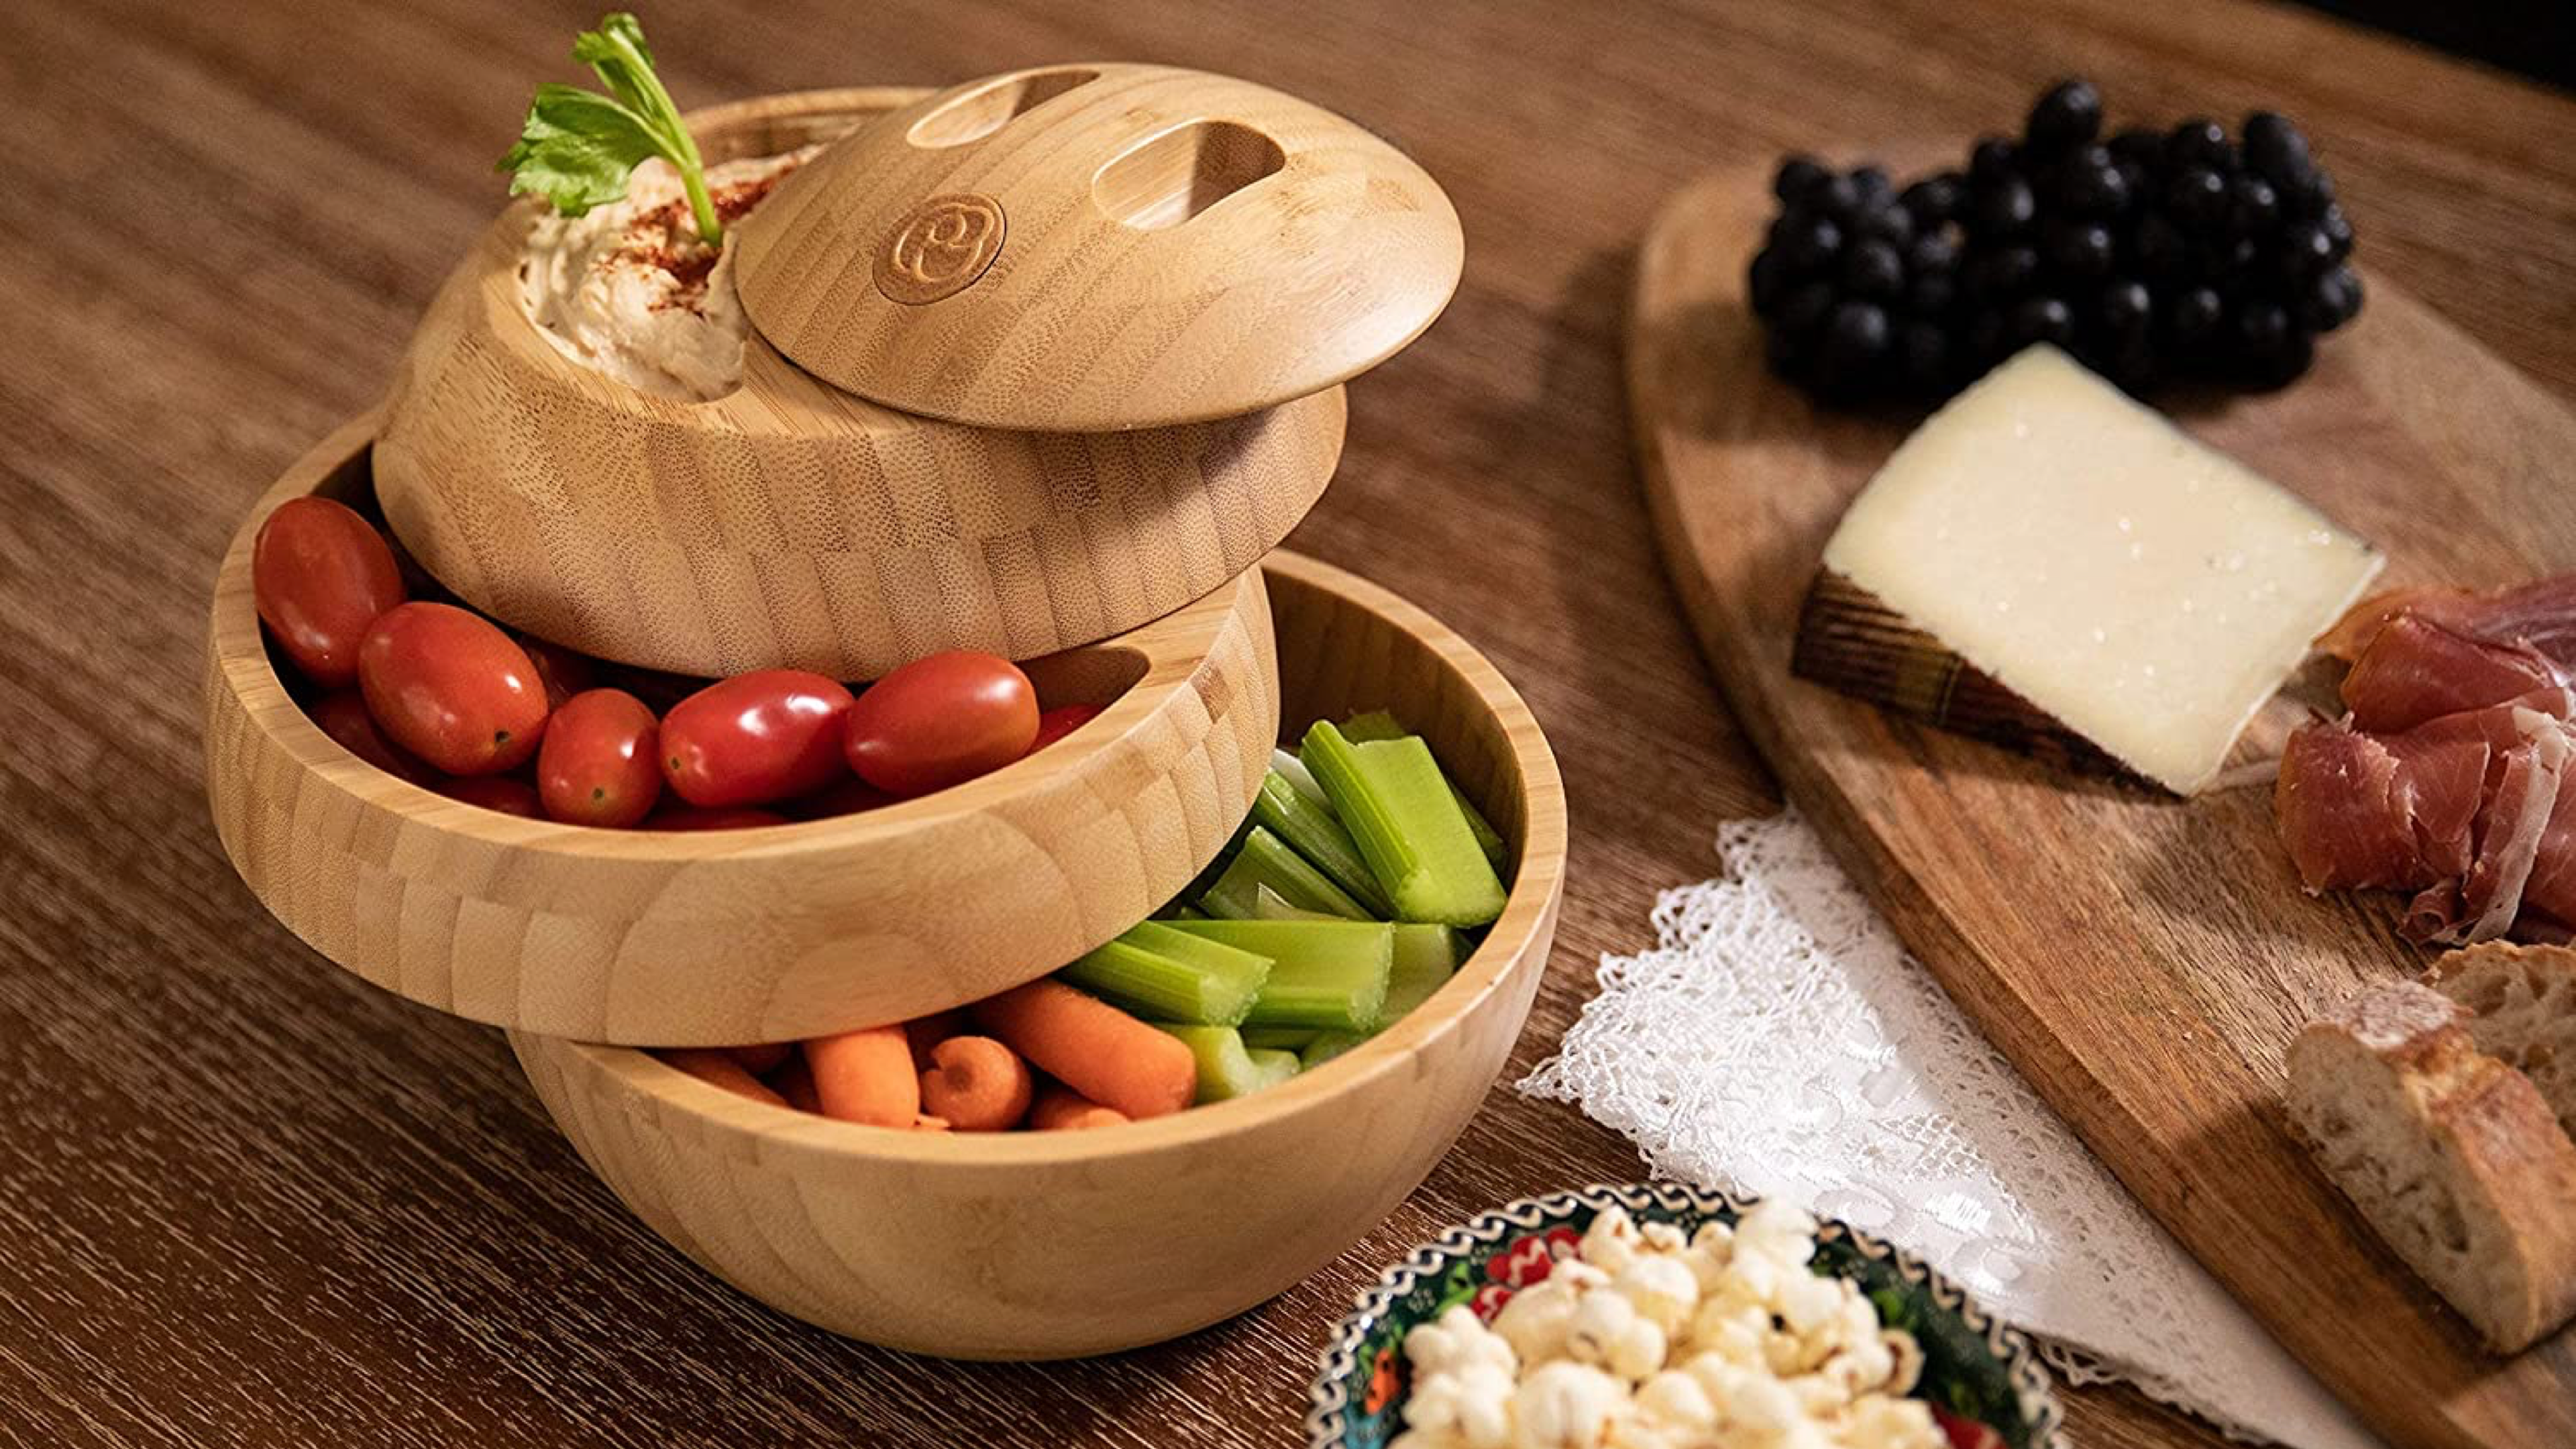 orb-shaped charcuterie board that opens up